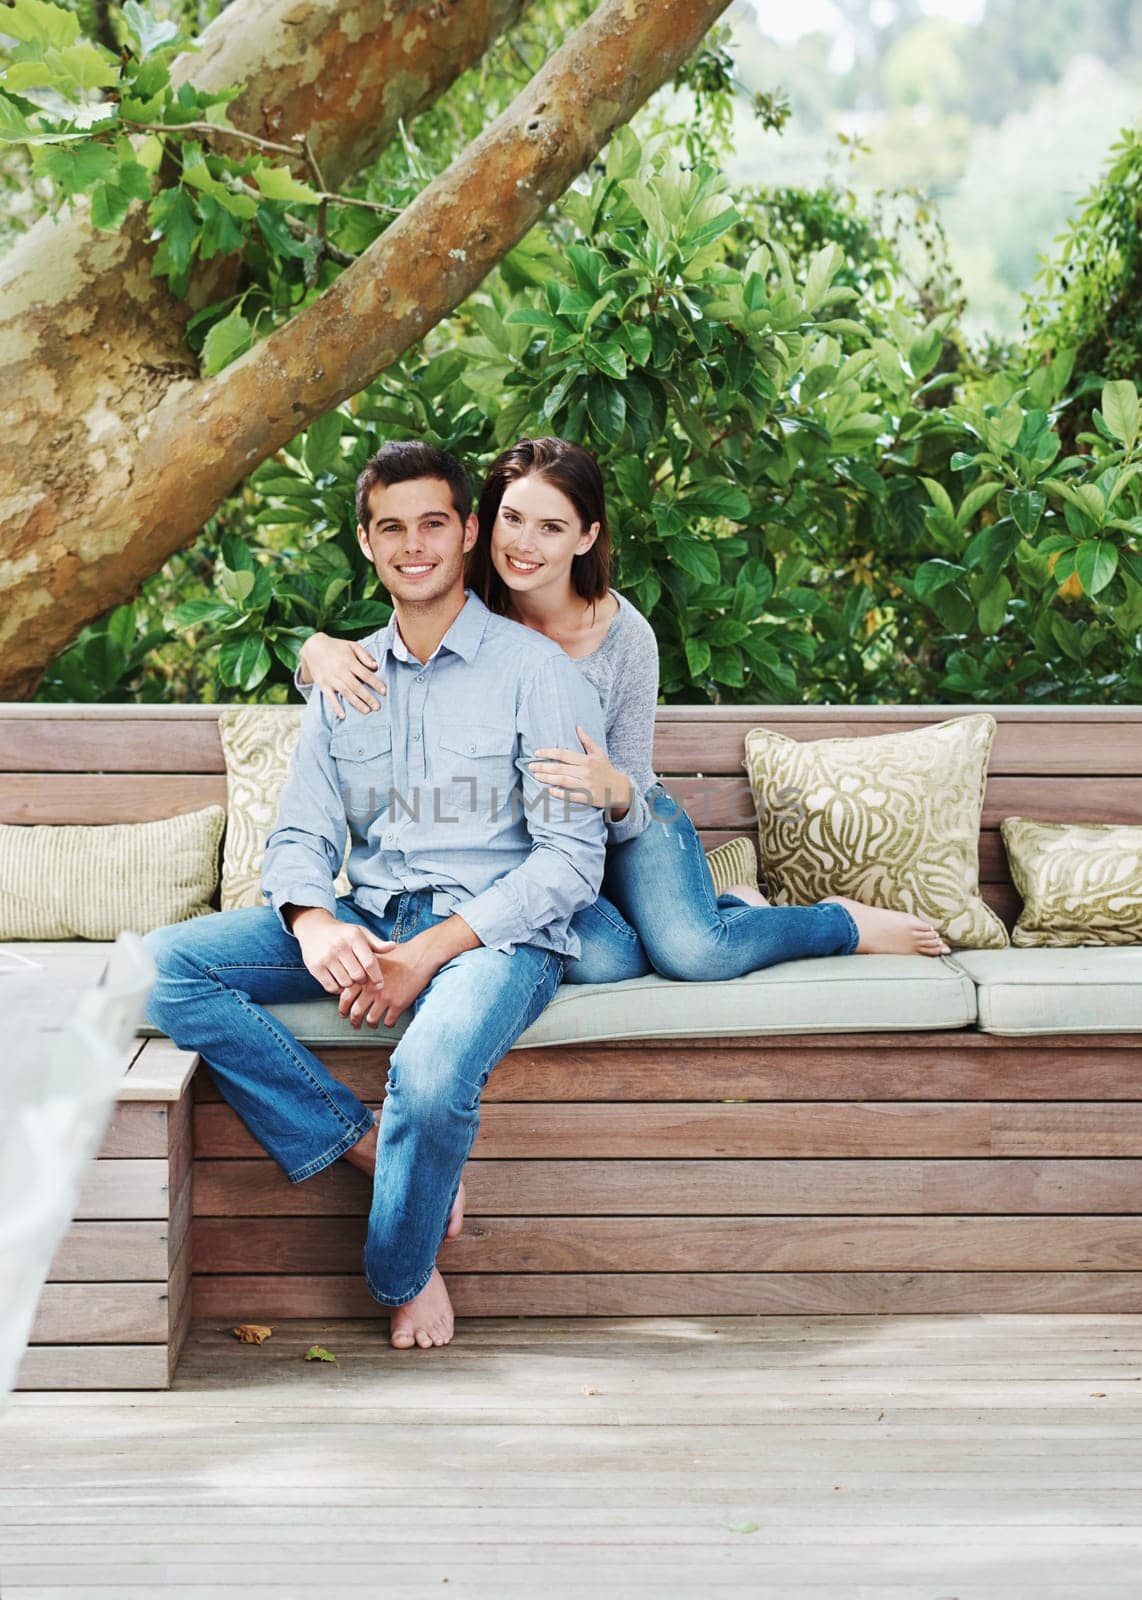 Couple, portrait and love outdoor on bench for relationship bond, wood floor and relax in nature. Woman, man and happiness together with trees for summer time, smile and romantic date in natural park.